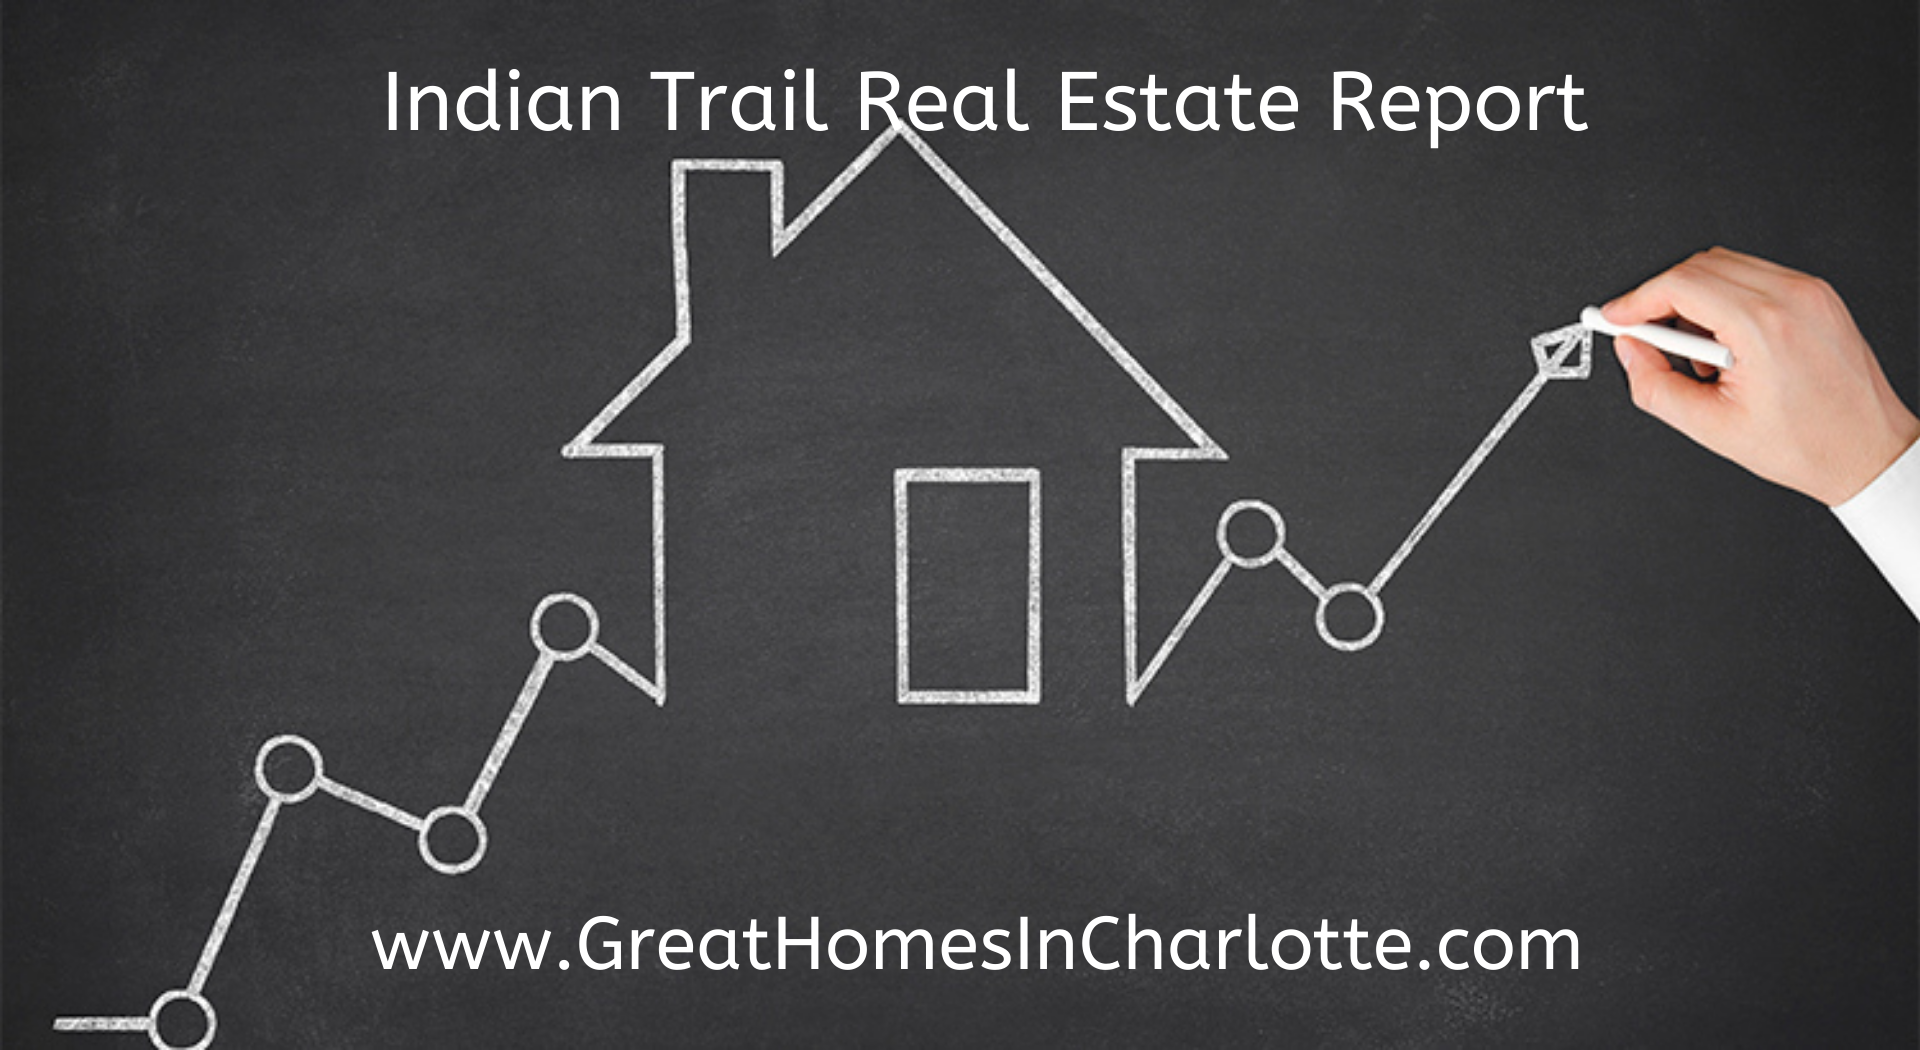 Indian_Trail_Real_Estate_Report.png